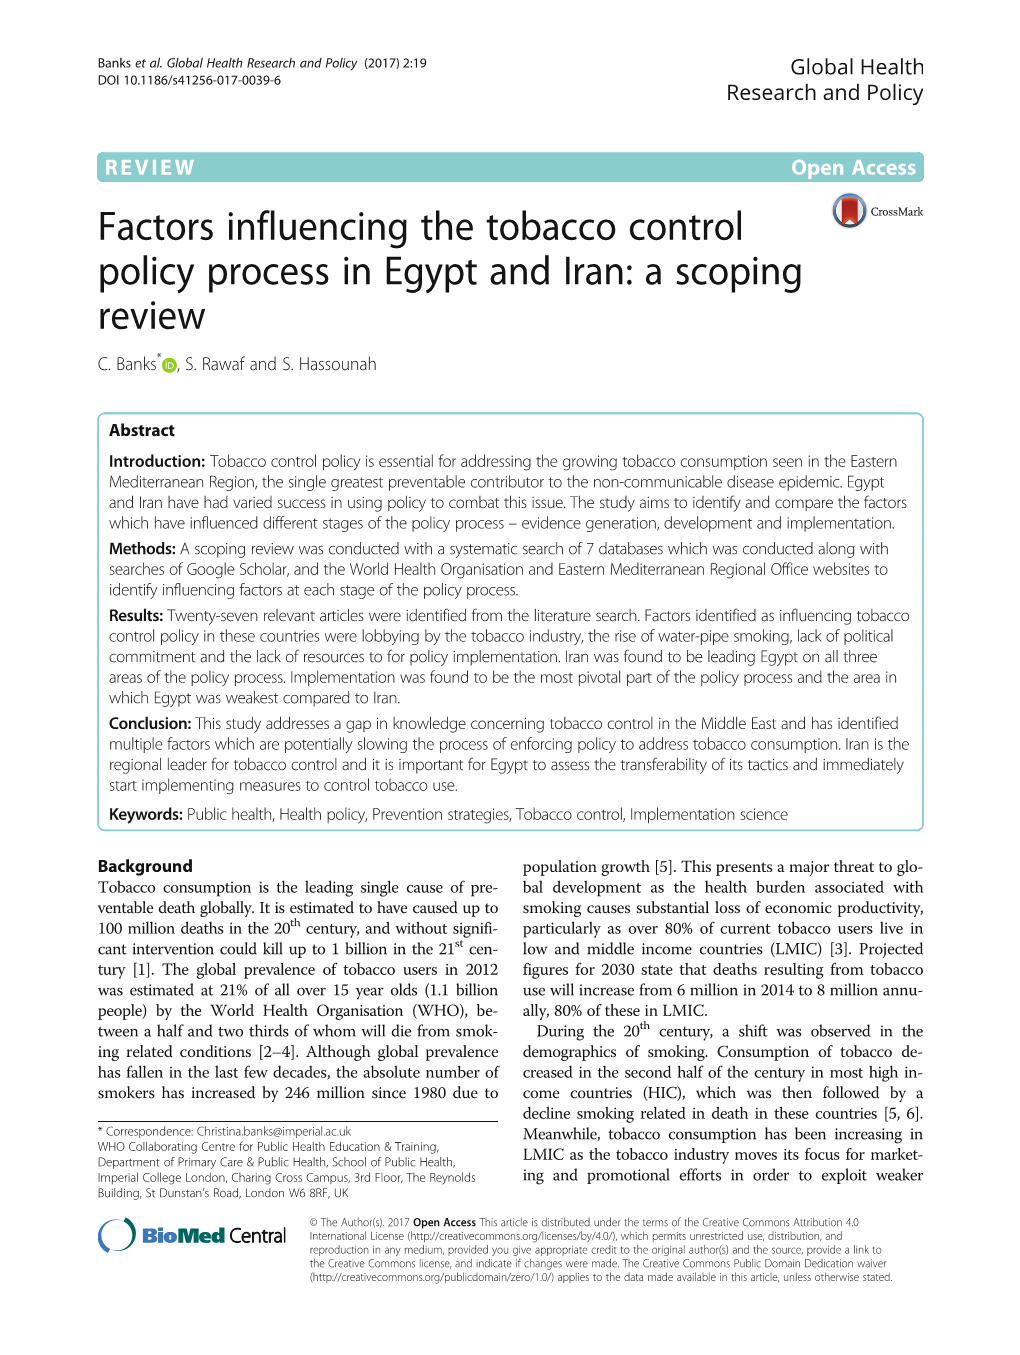 Factors Influencing the Tobacco Control Policy Process in Egypt and Iran: a Scoping Review C